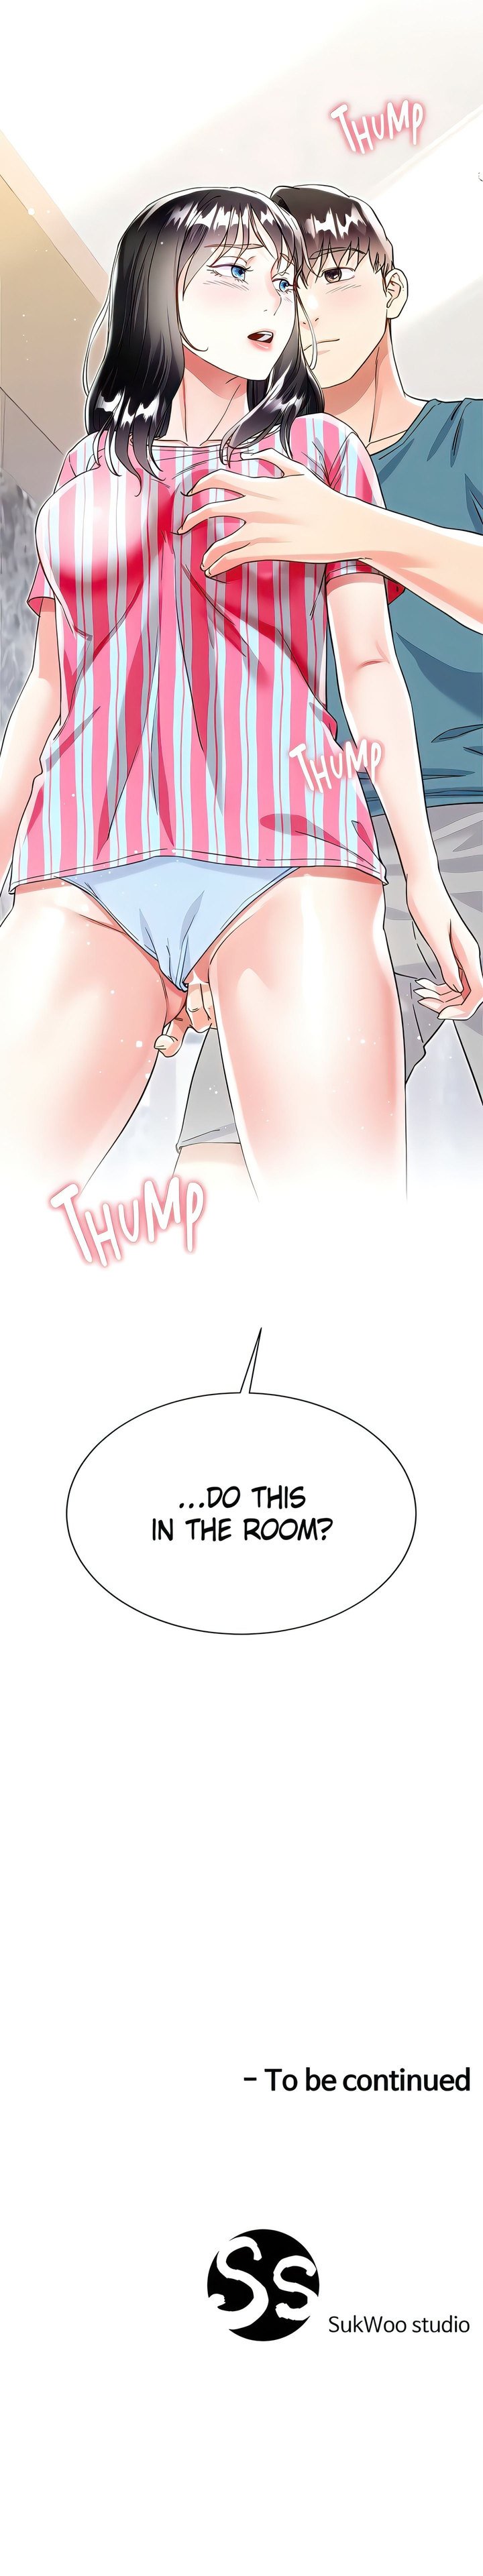 my-sister-in-laws-skirt-chap-49-30